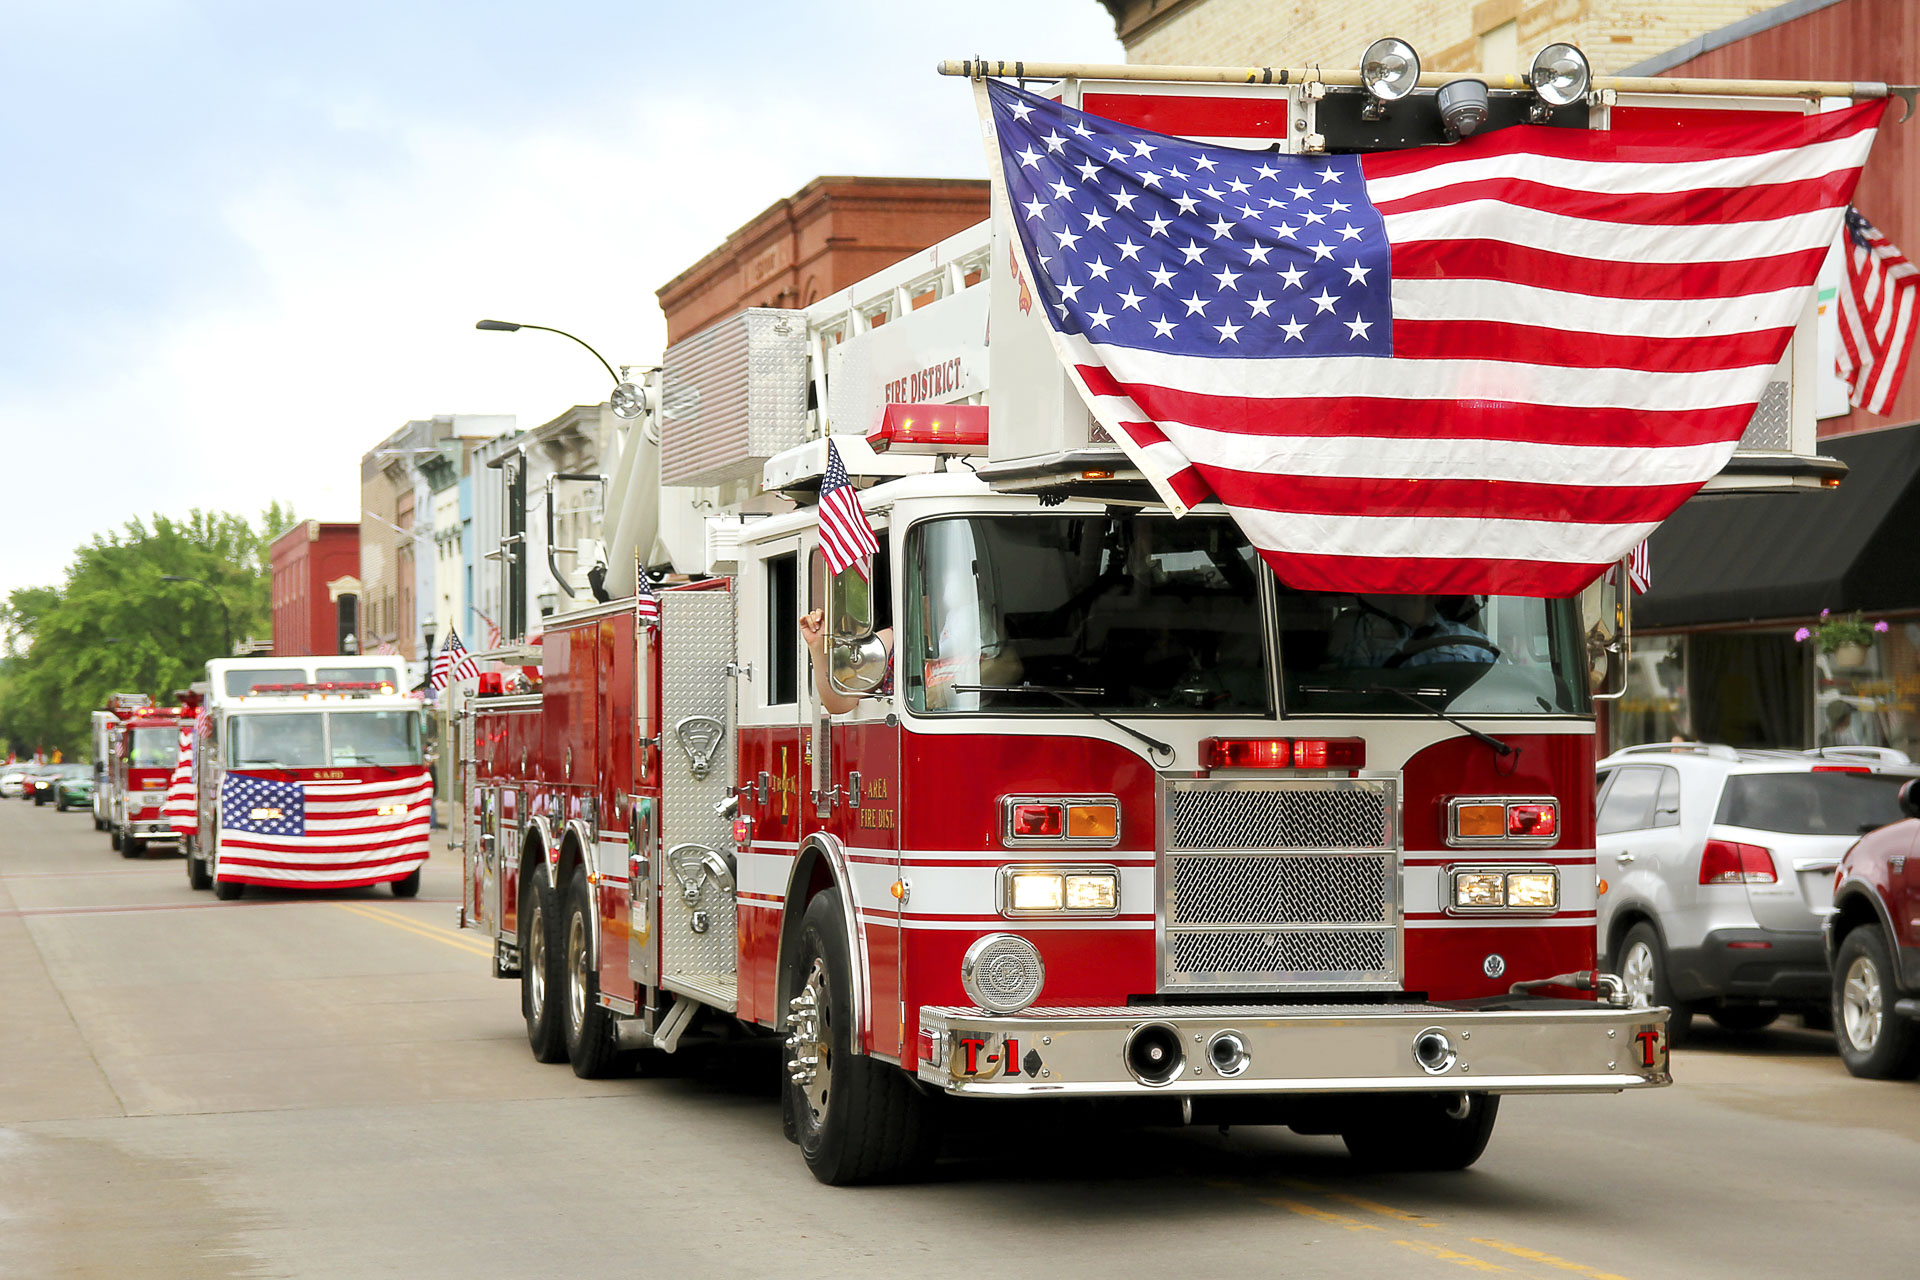 Fire trucks on Independence Day